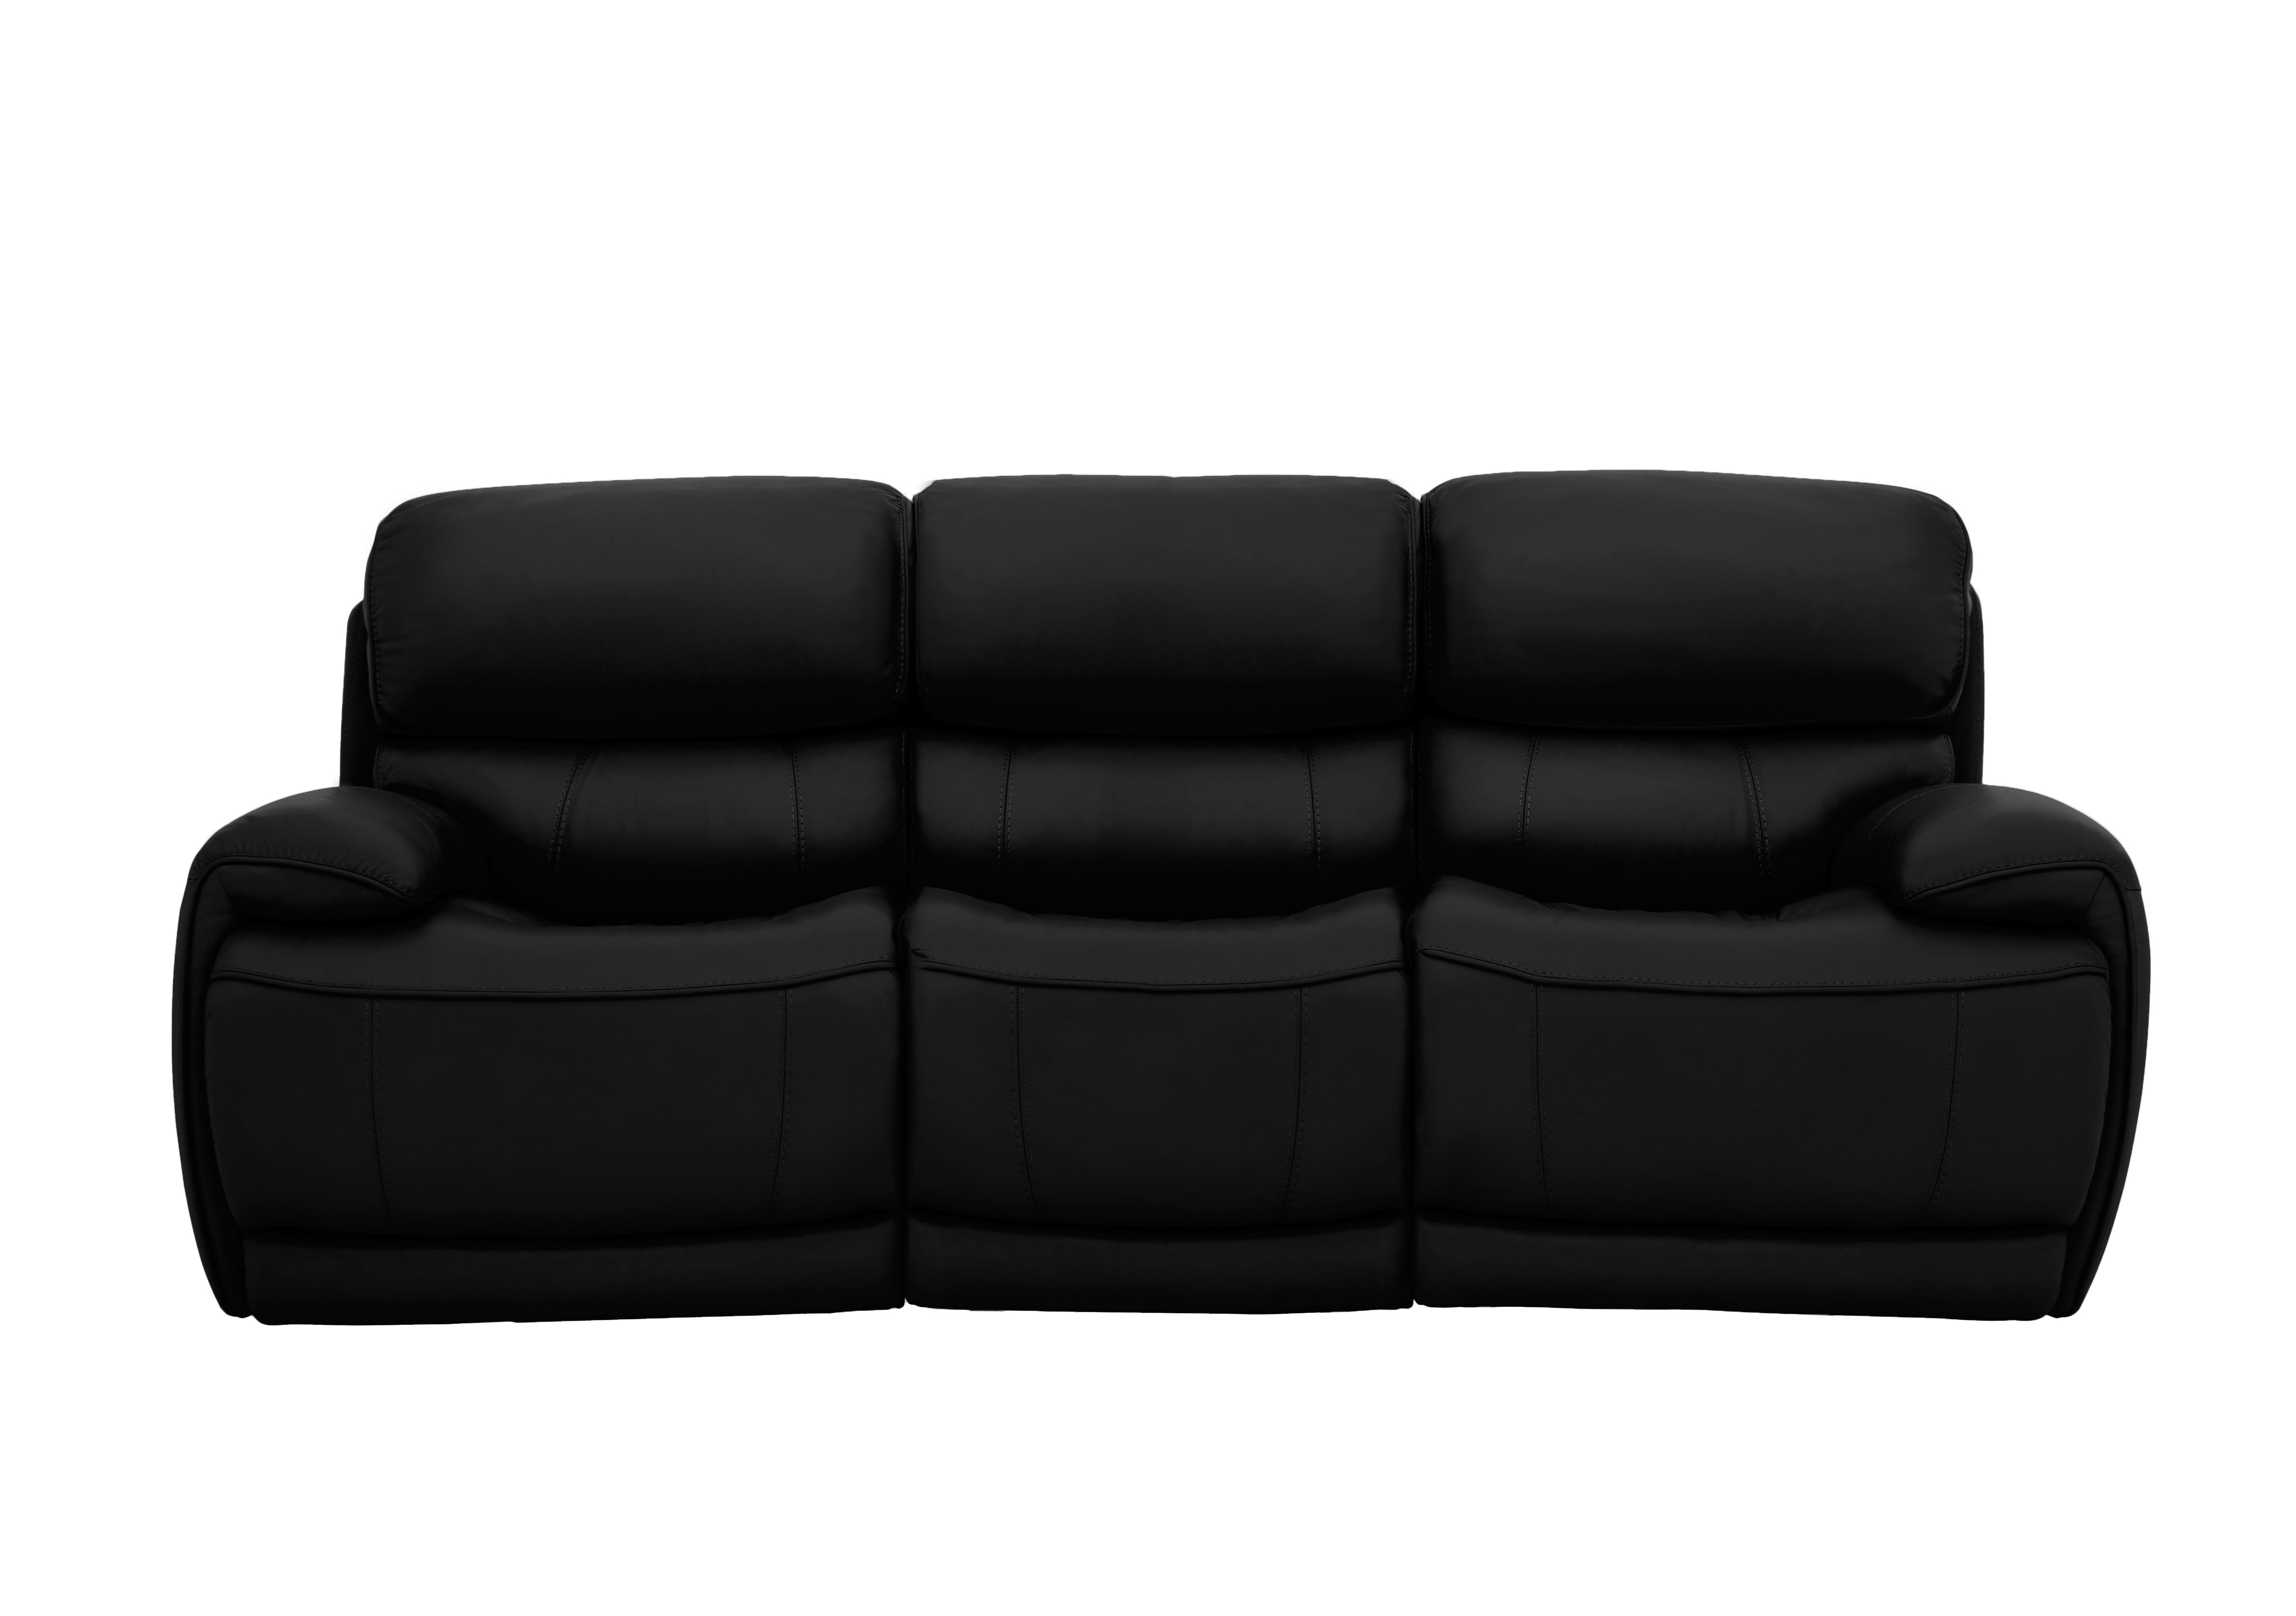 Rocco 3 Seater Leather Power Rocker Sofa with Power Headrests in Bv-3500 Classic Black on Furniture Village